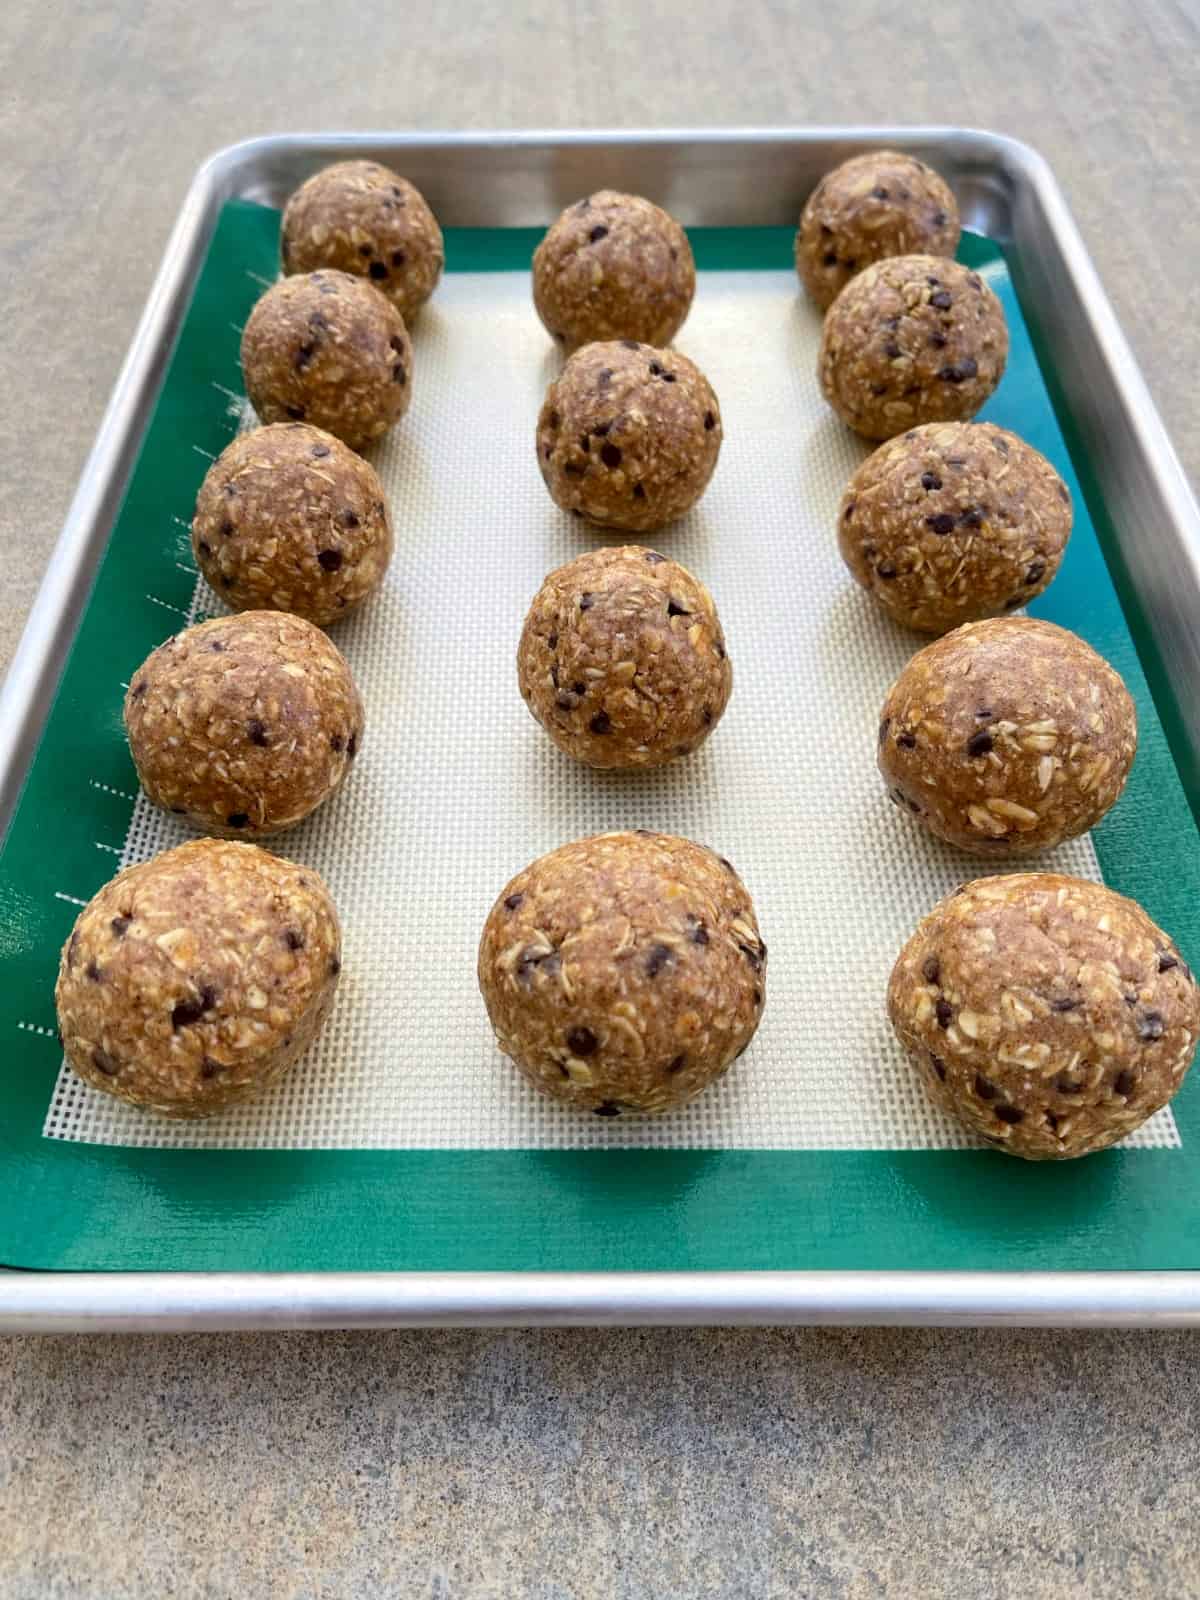 No-bake oatmeal chocolate chip protein balls in silicone-lined baking sheet.